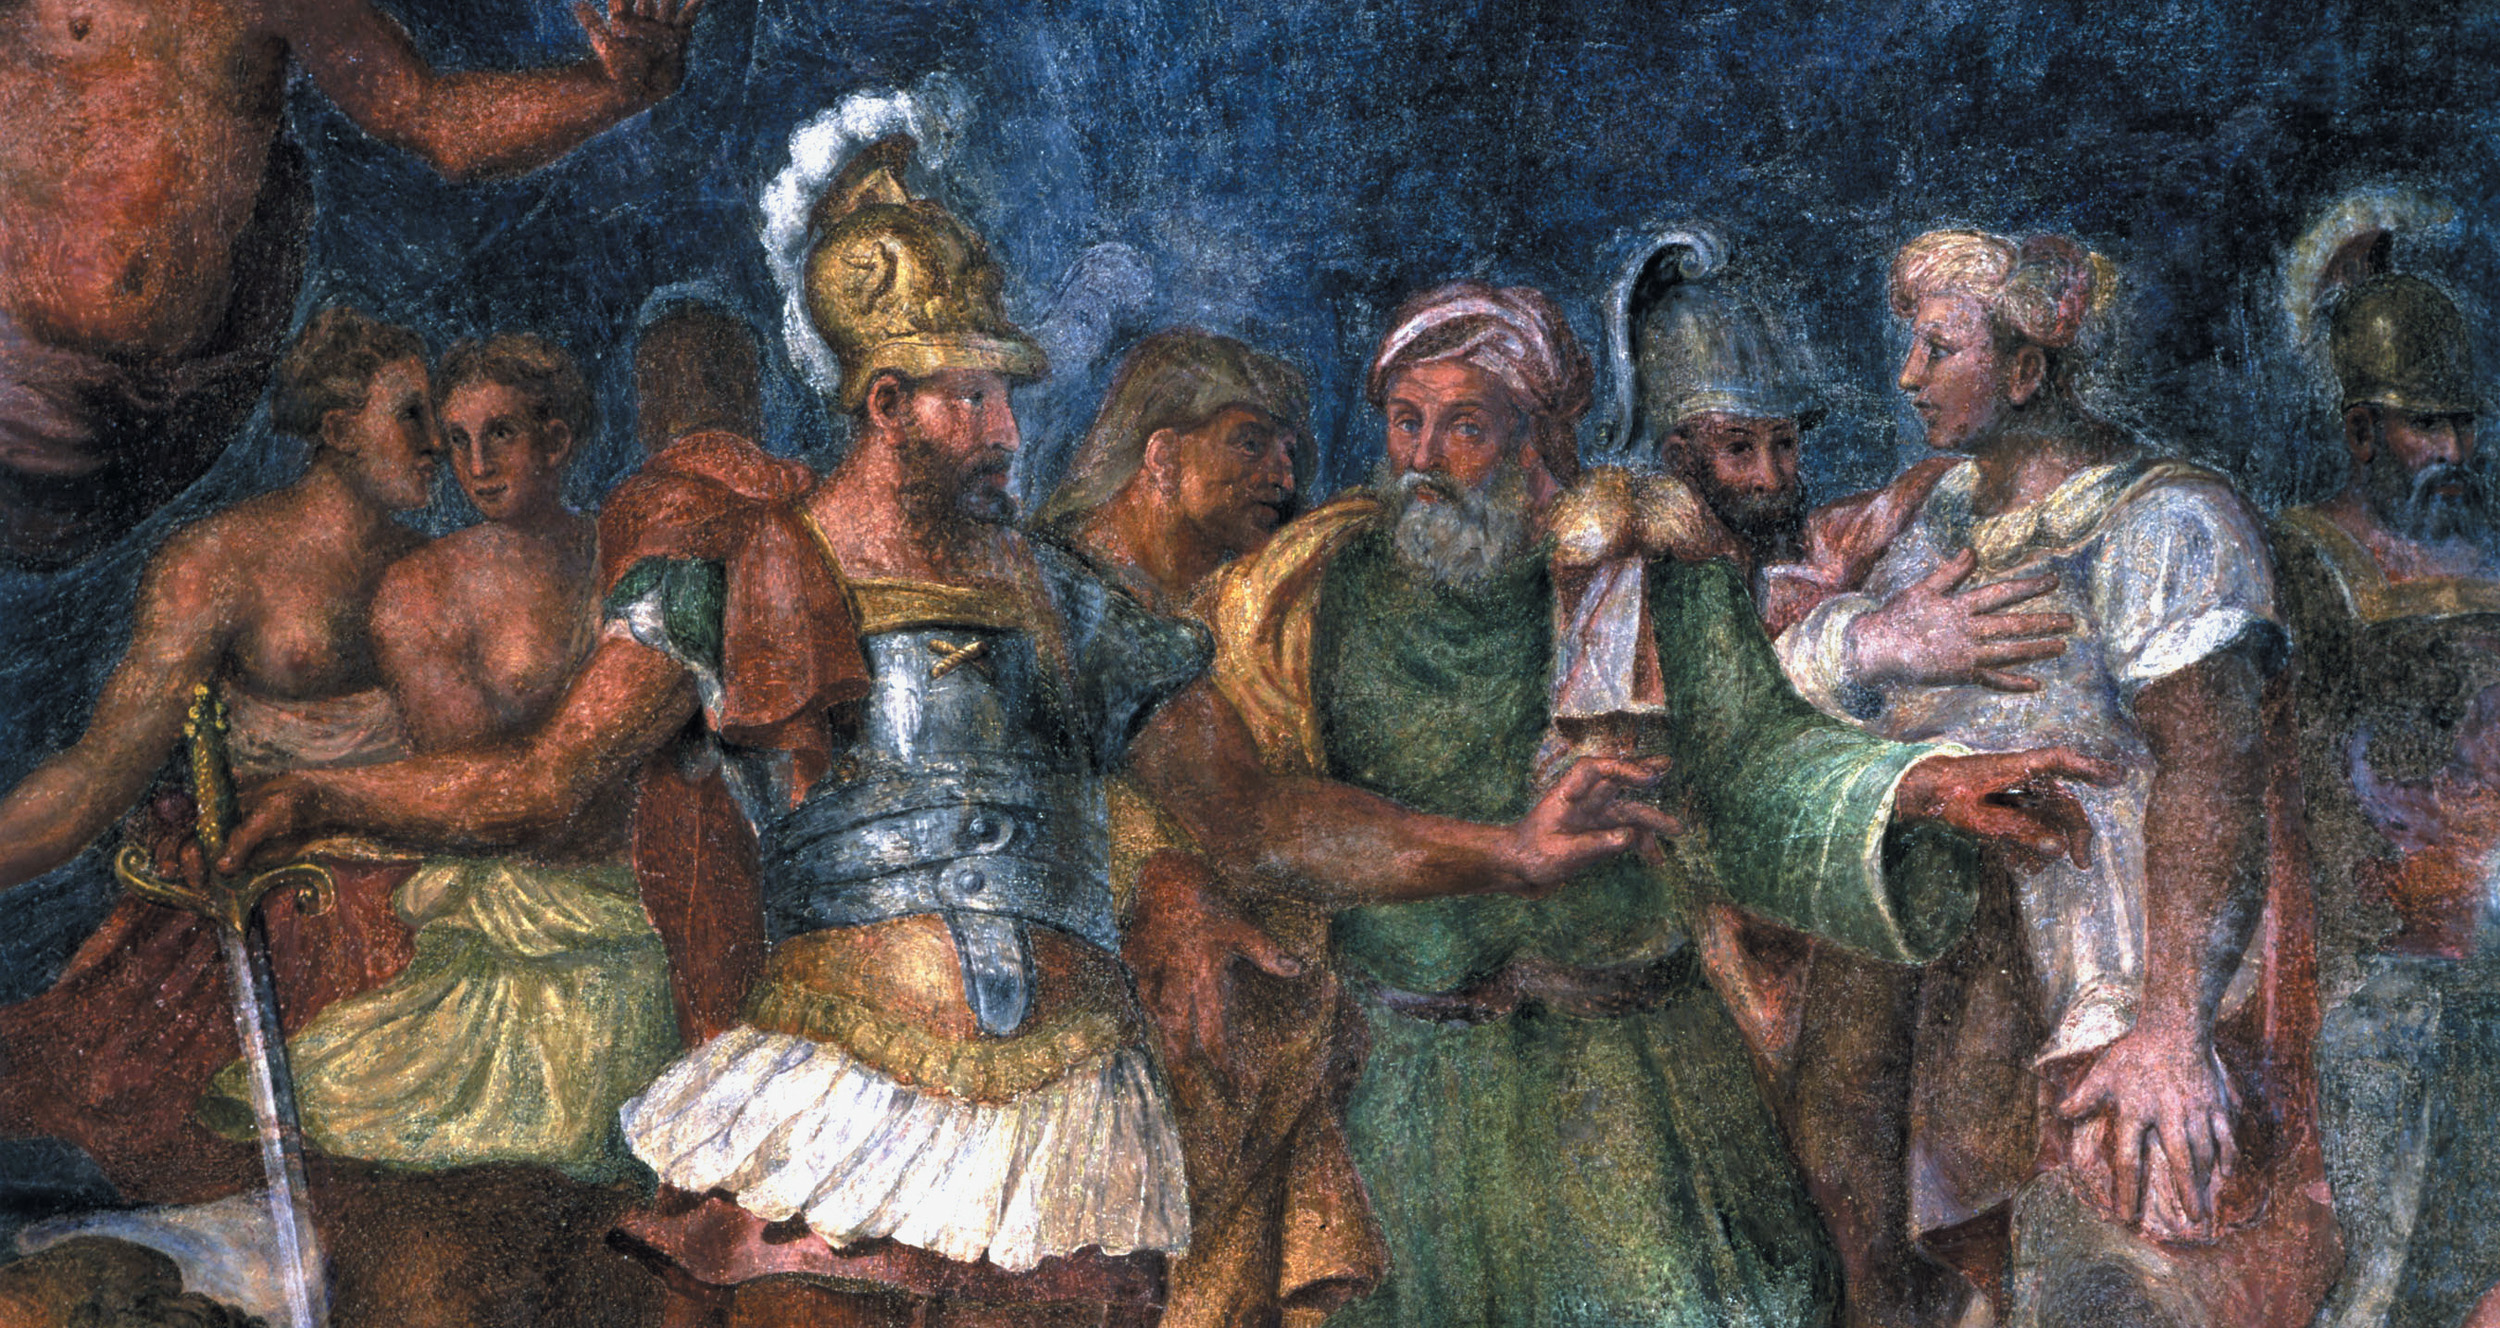 Meeting with leaders of Tyre, Alexander the Great hoped to capture the city without the use of force. Alexander is shown in this detail of a 17th century fresco depicting his life.